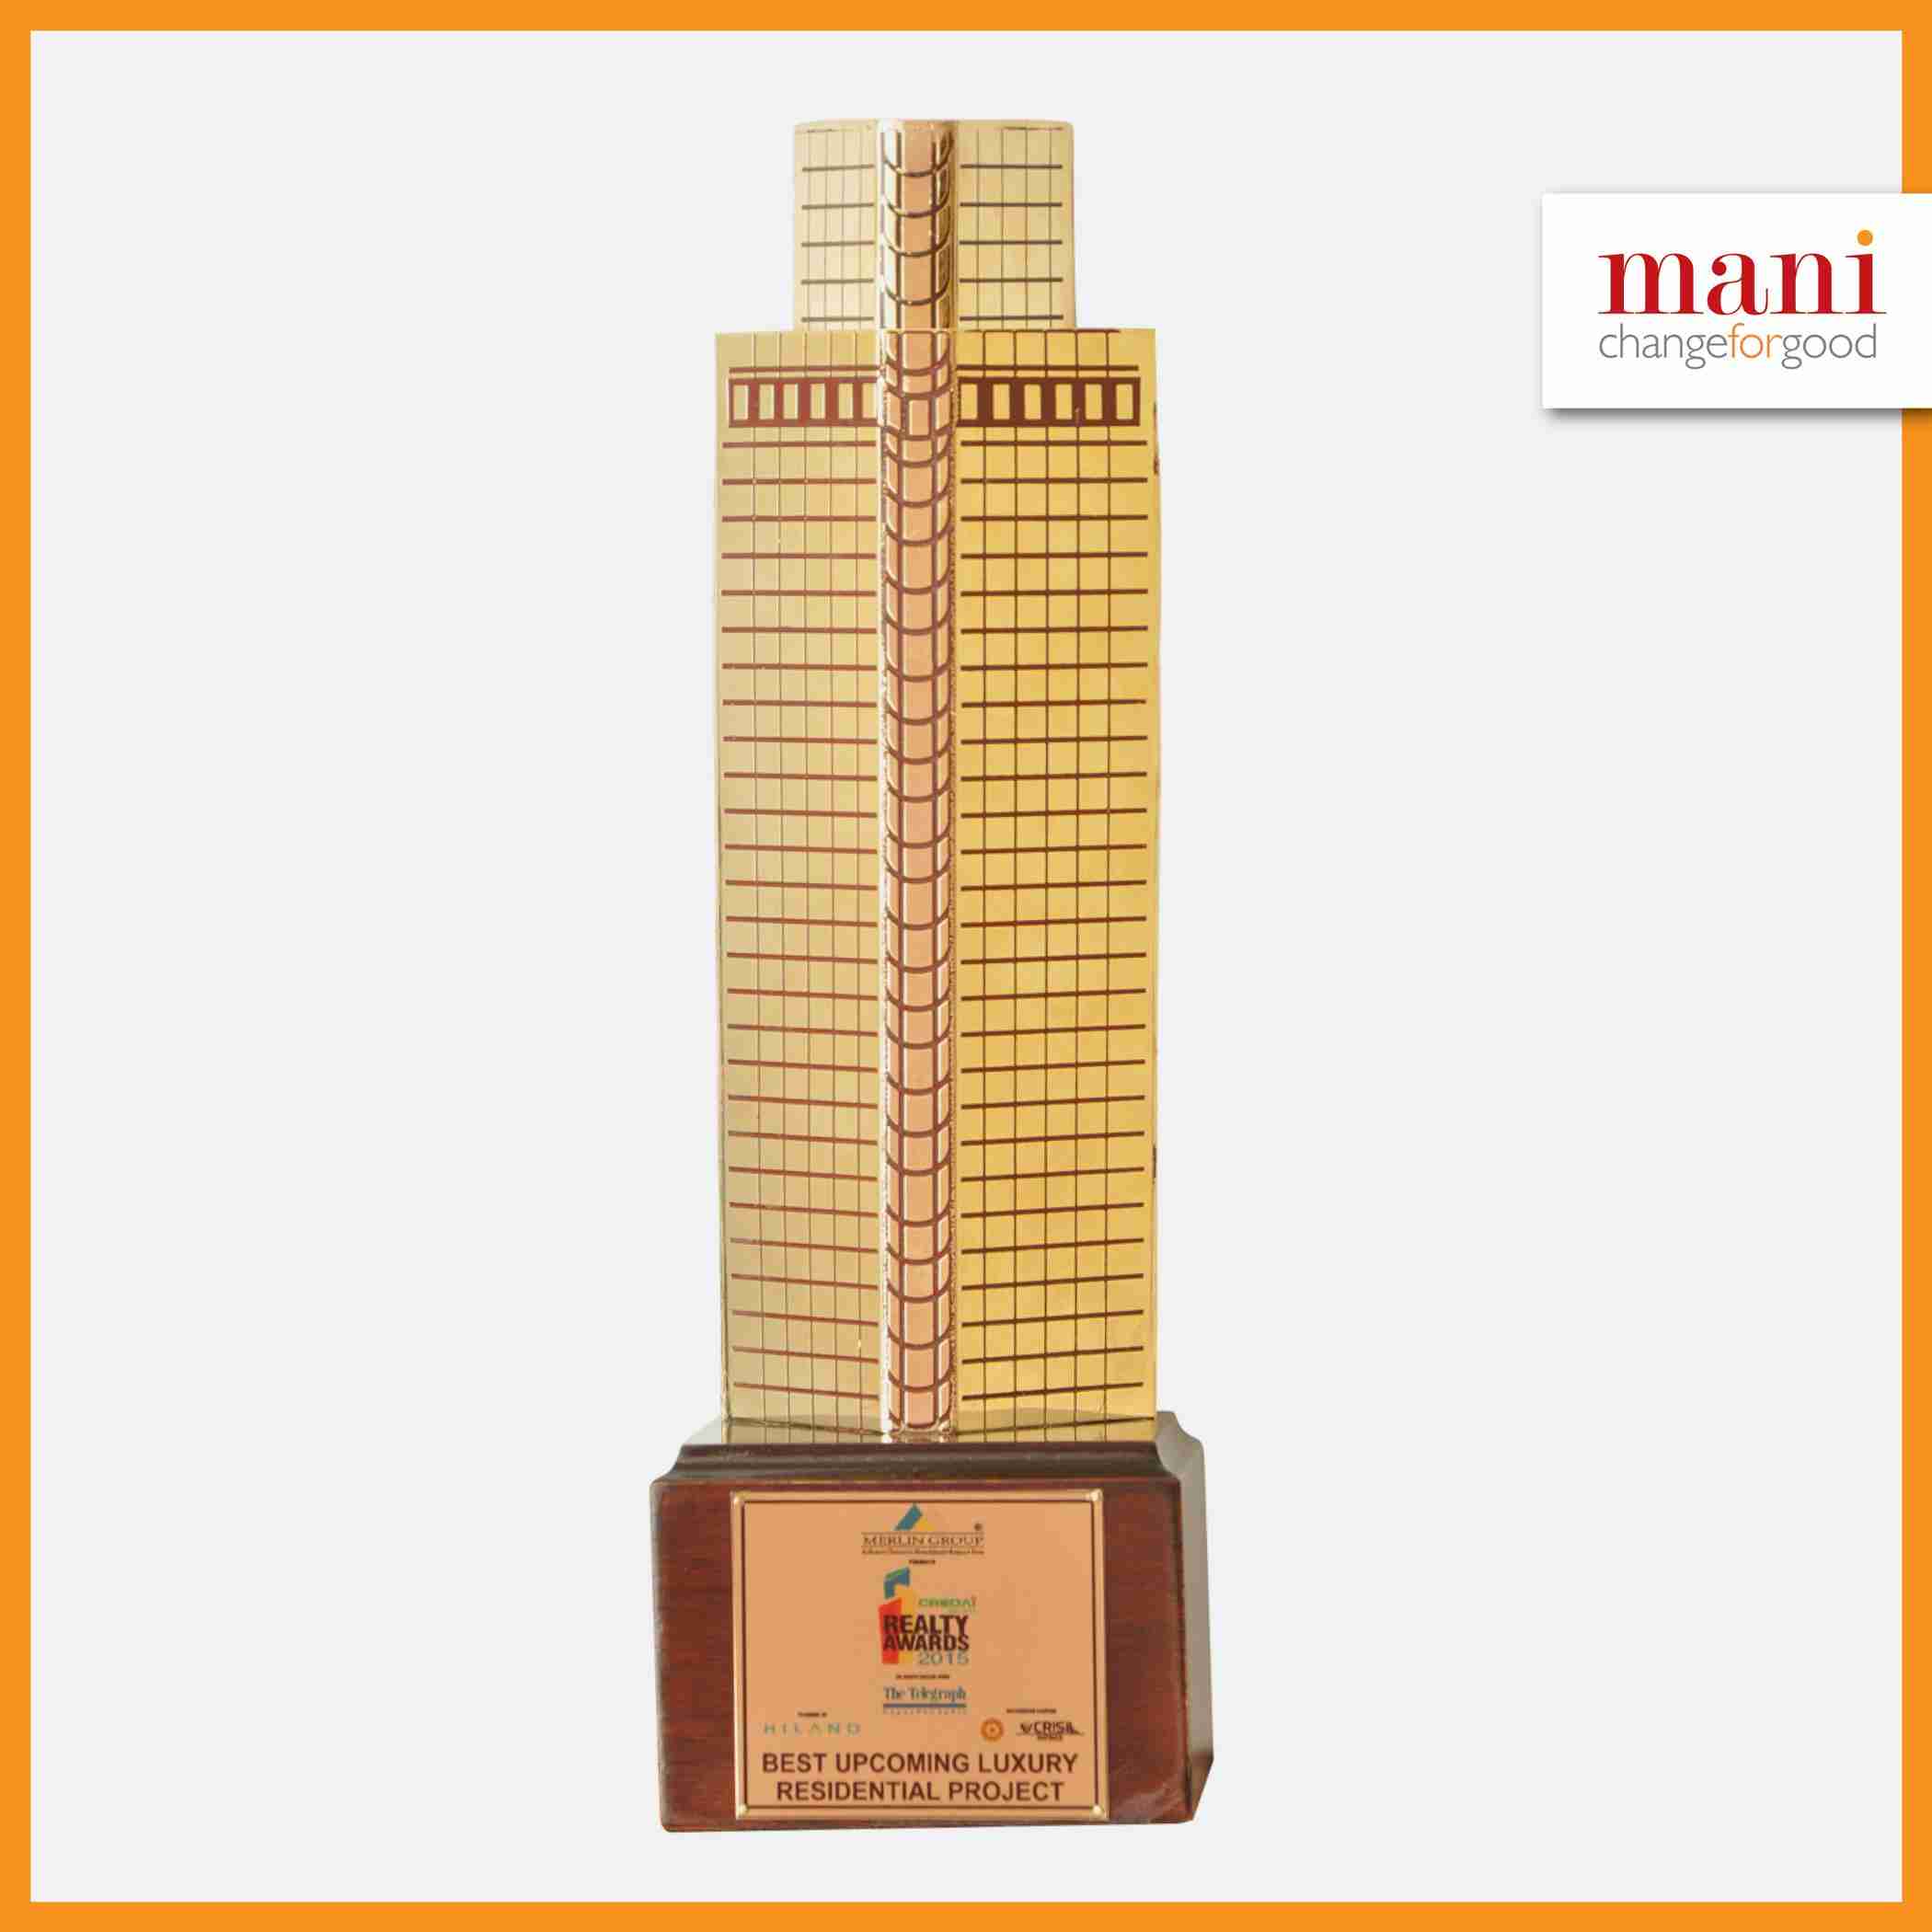 Tirumani awarded “Best Residential Project in the Ultra-Luxury Segment in Kolkata” at the 2014 CNBC AWAAZ AWARDS Update